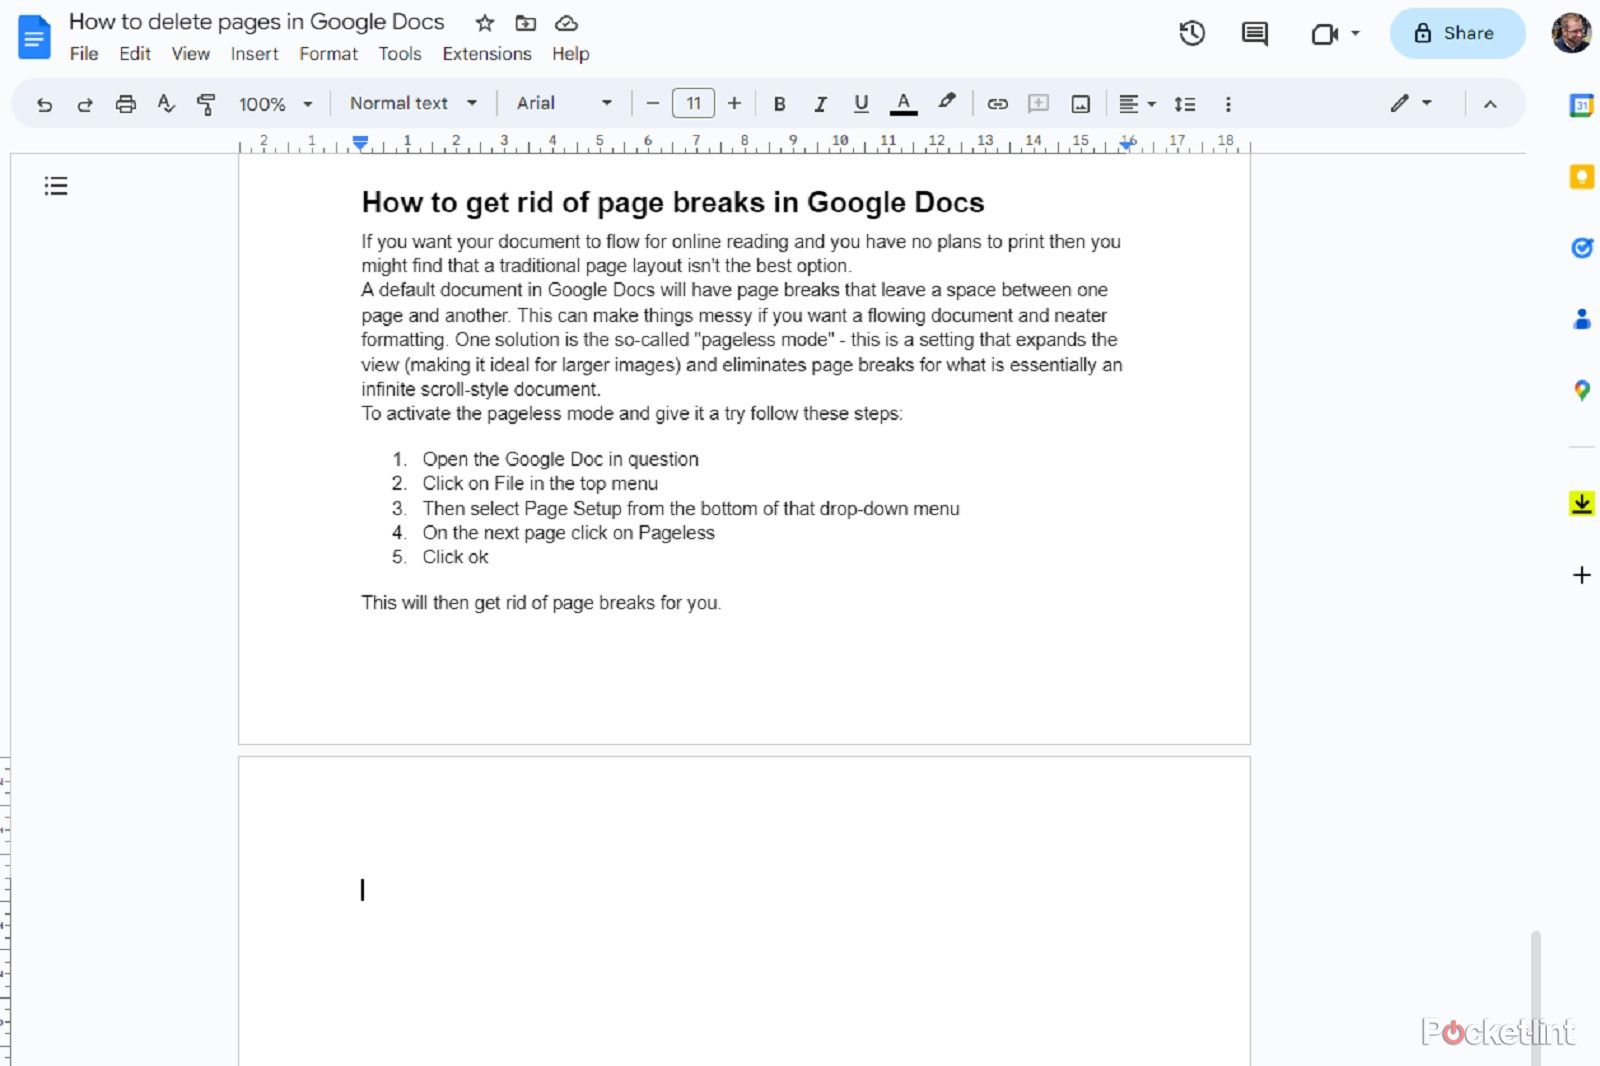 delete pages in Google Docs